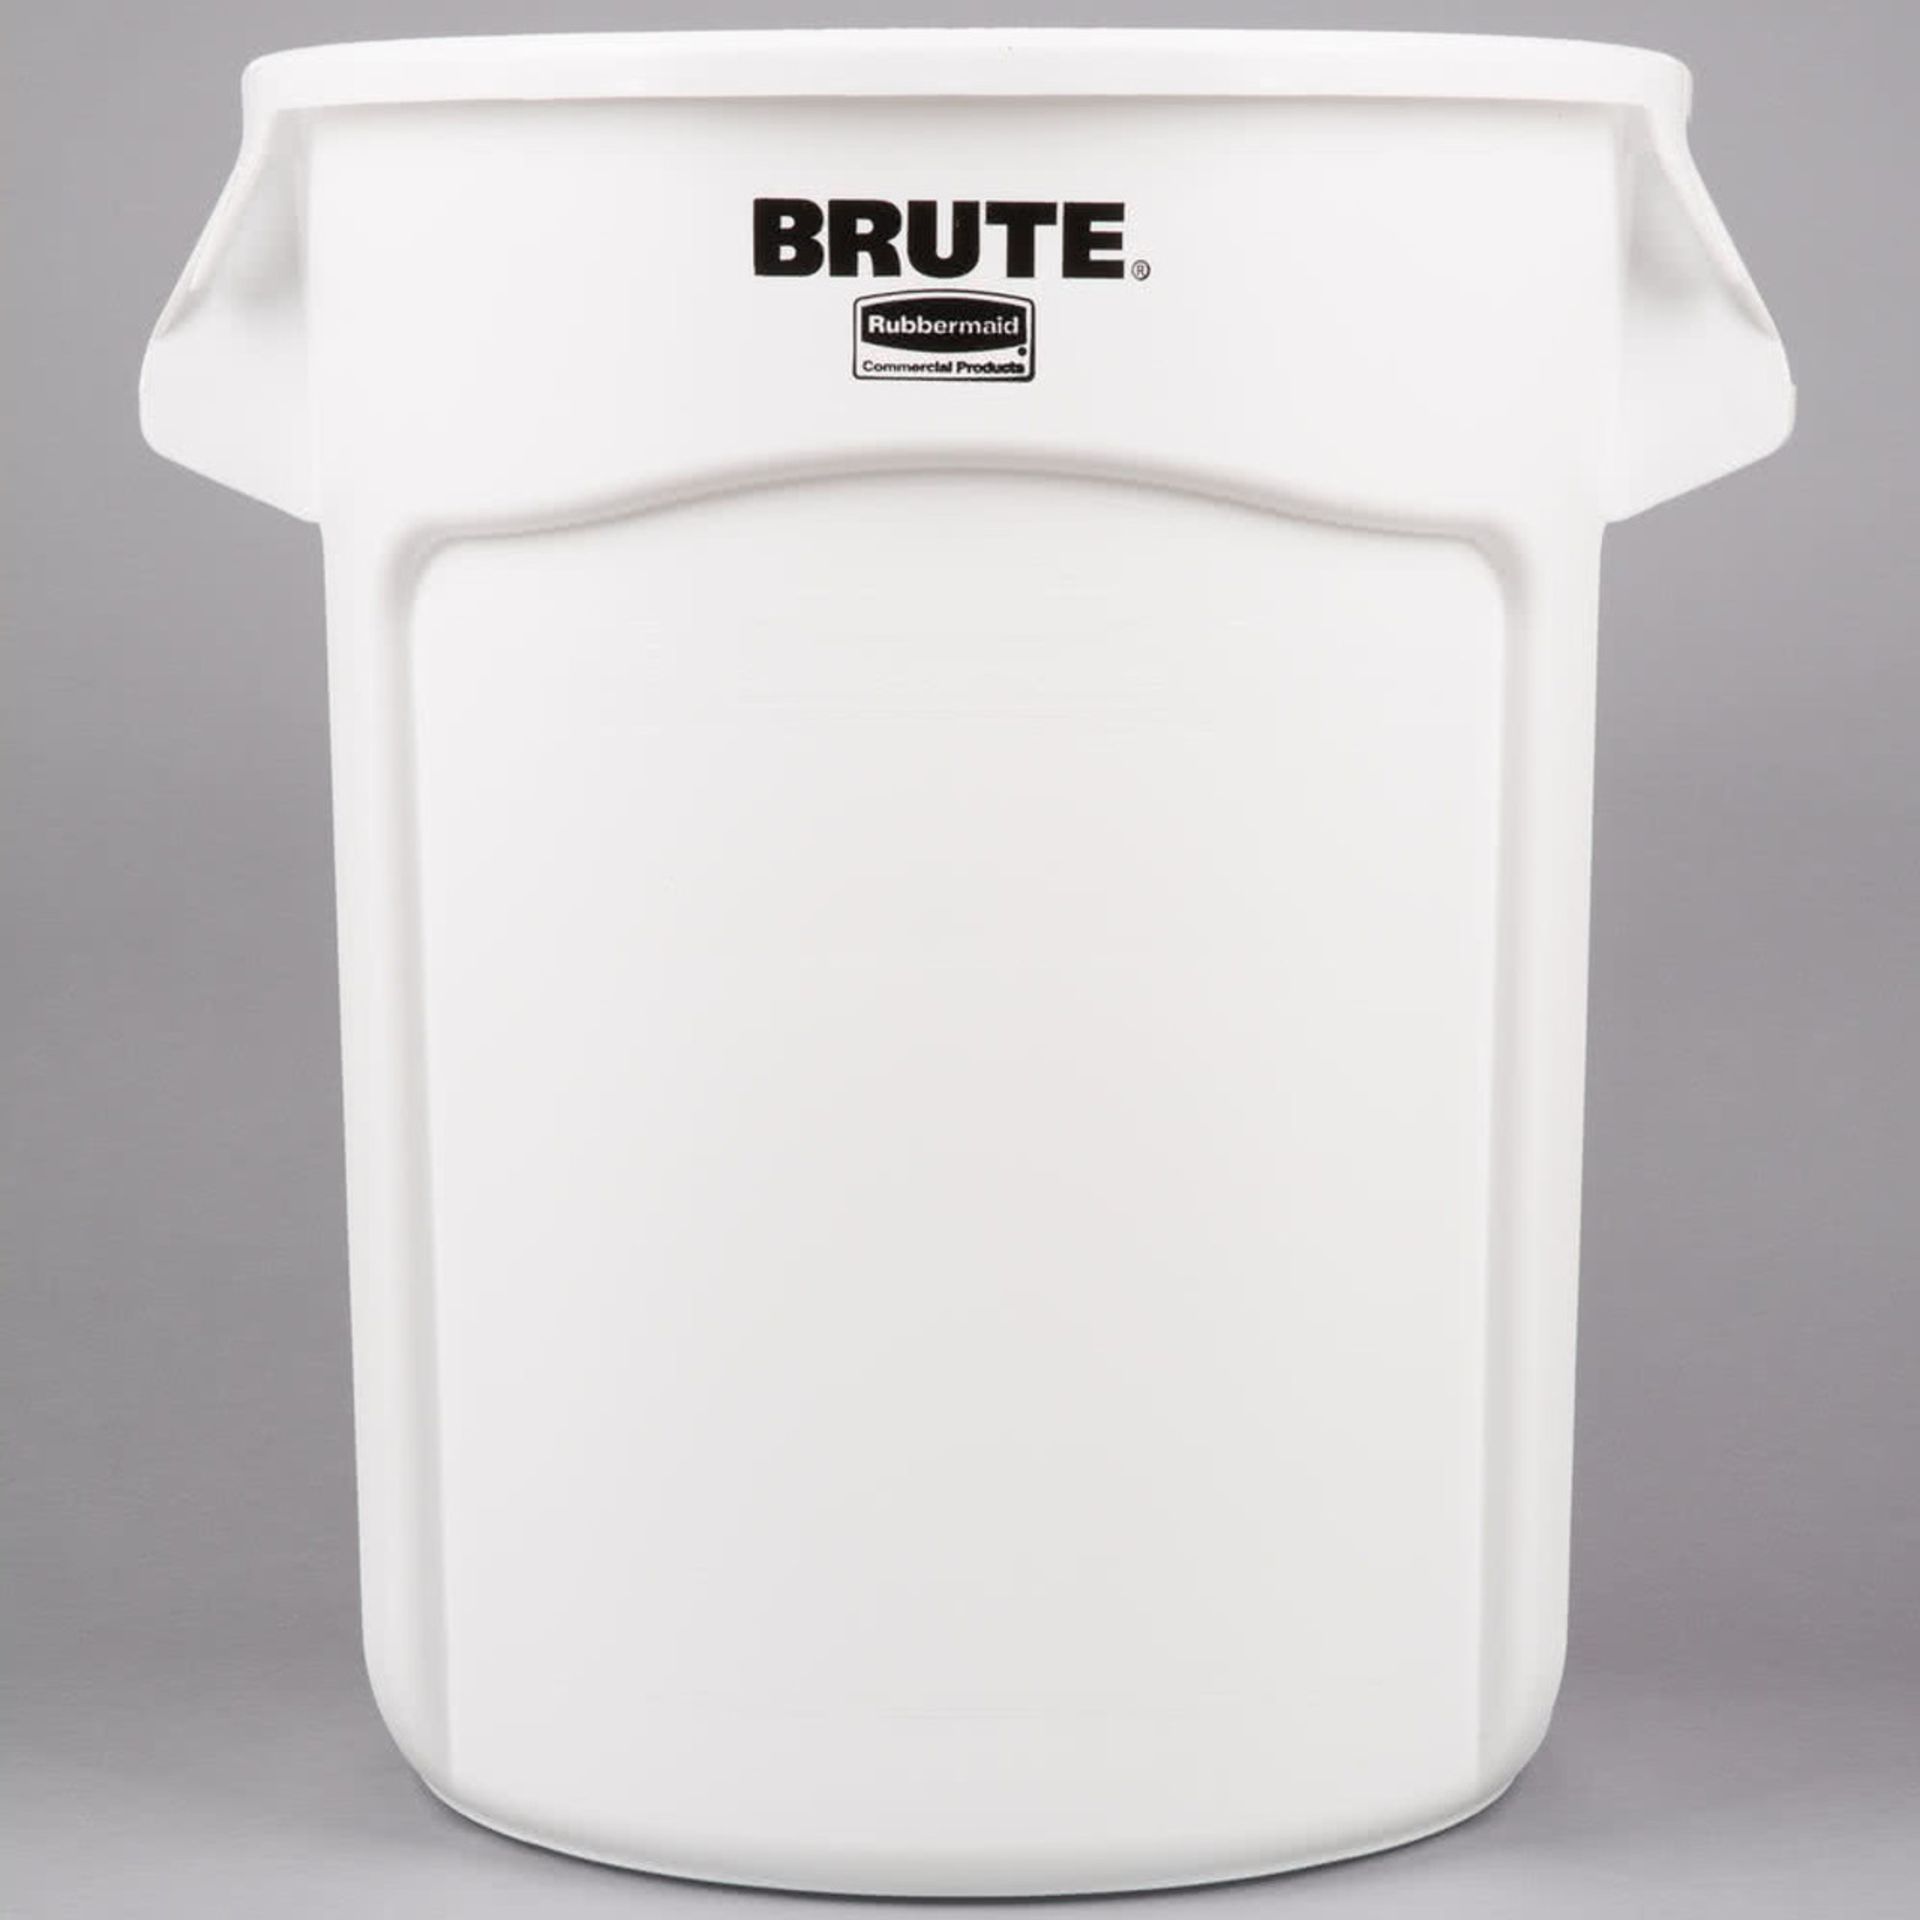 6 X BRAND NEW RUBBERMAID BRUTE 75.7L HEAVU DUTY ROUND WASTE AND UTILITY CONTAINERS WHITE R19-6